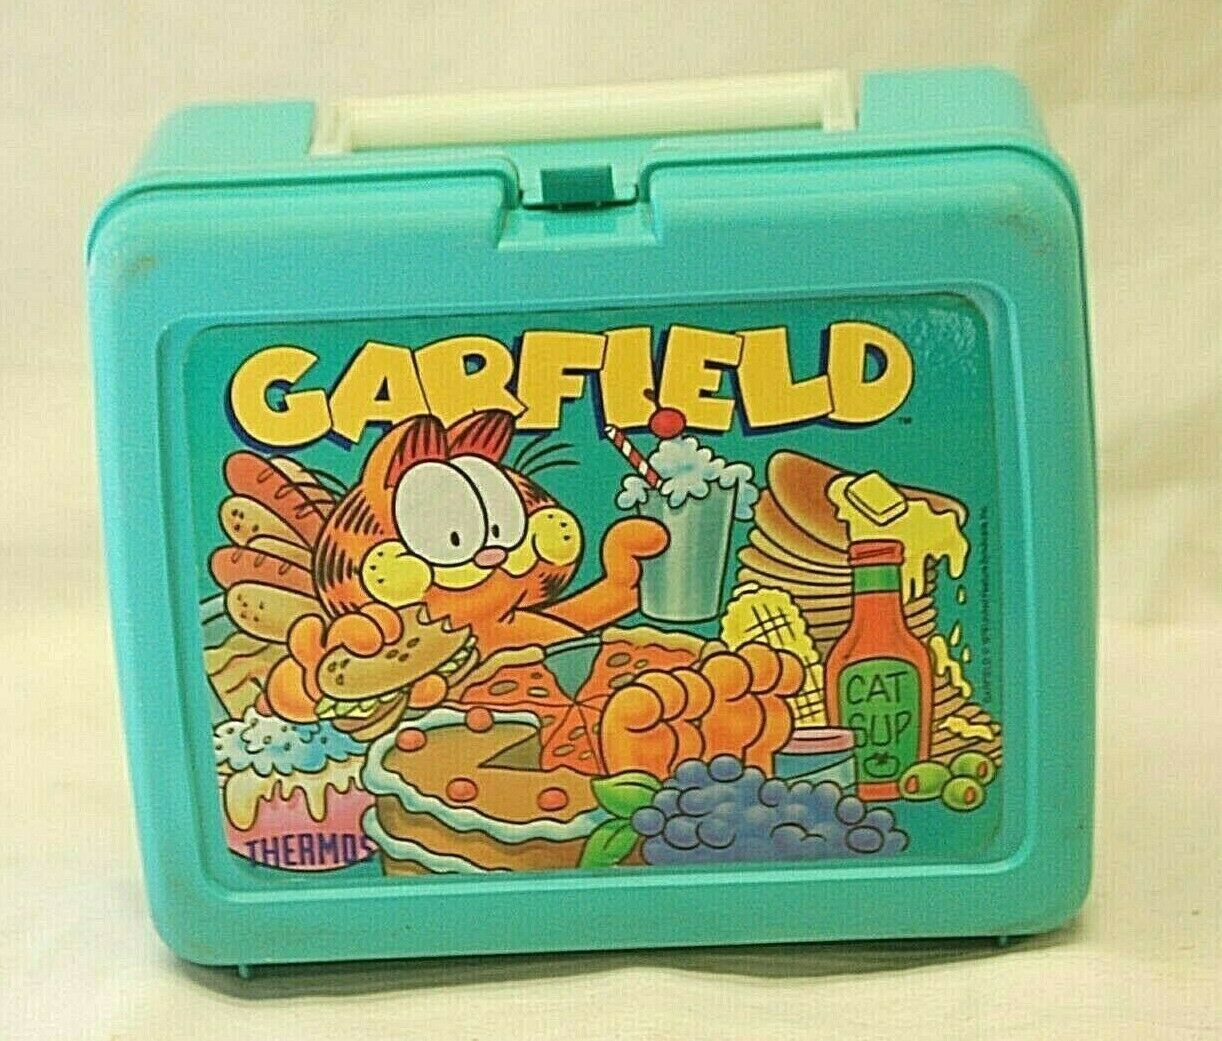 Primary image for Garfield Teal Lunch Box Lunchbox Jim Davis No Thermos Vintage 1978 USA